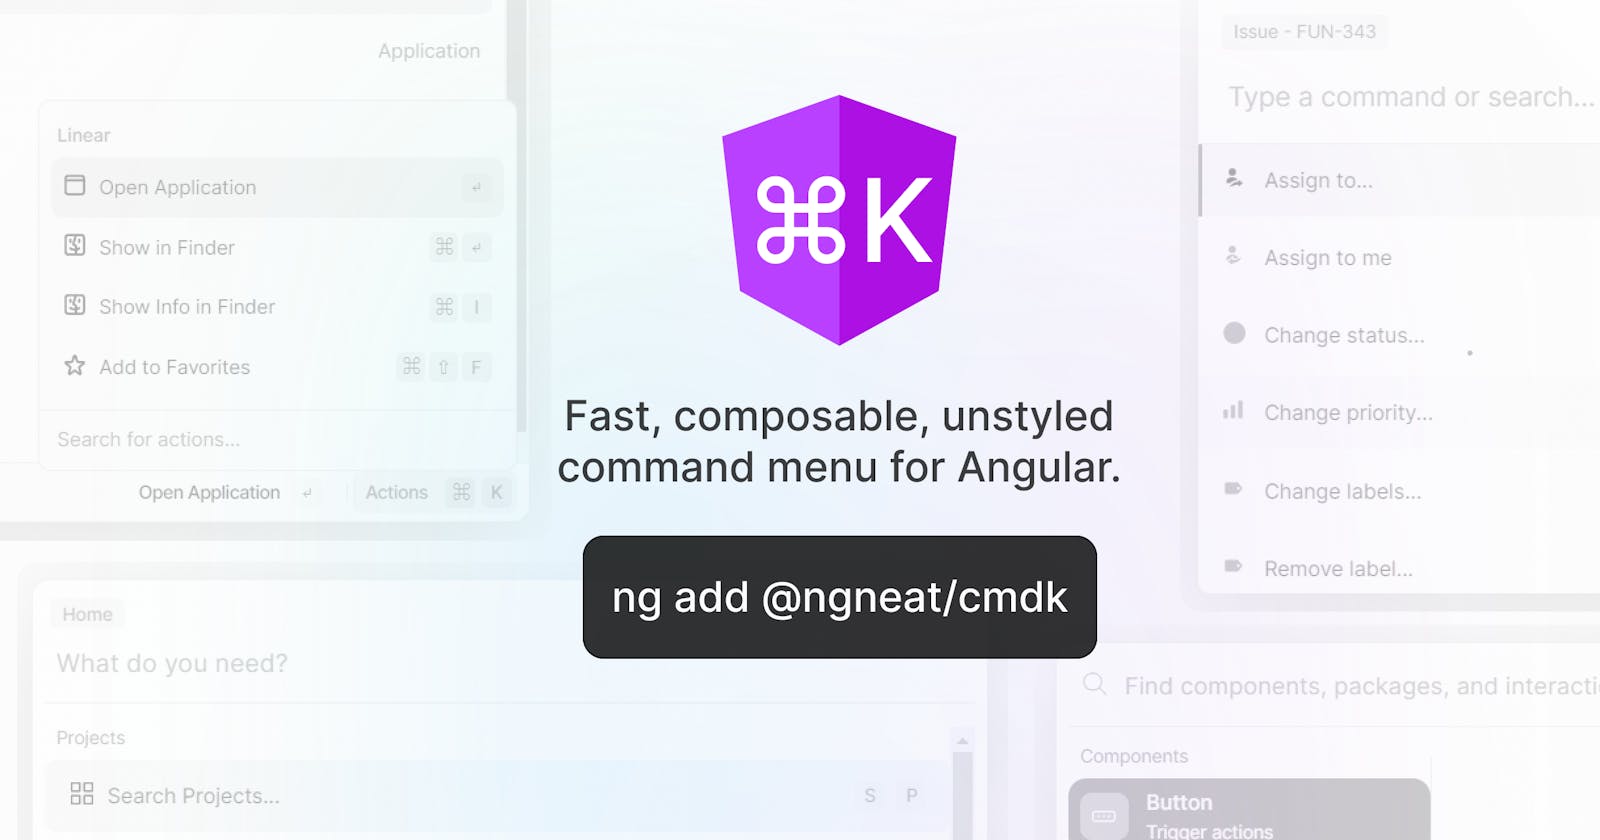 Announcing @ngneat/cmdk — Fast, composable, unstyled command menu for Angular.